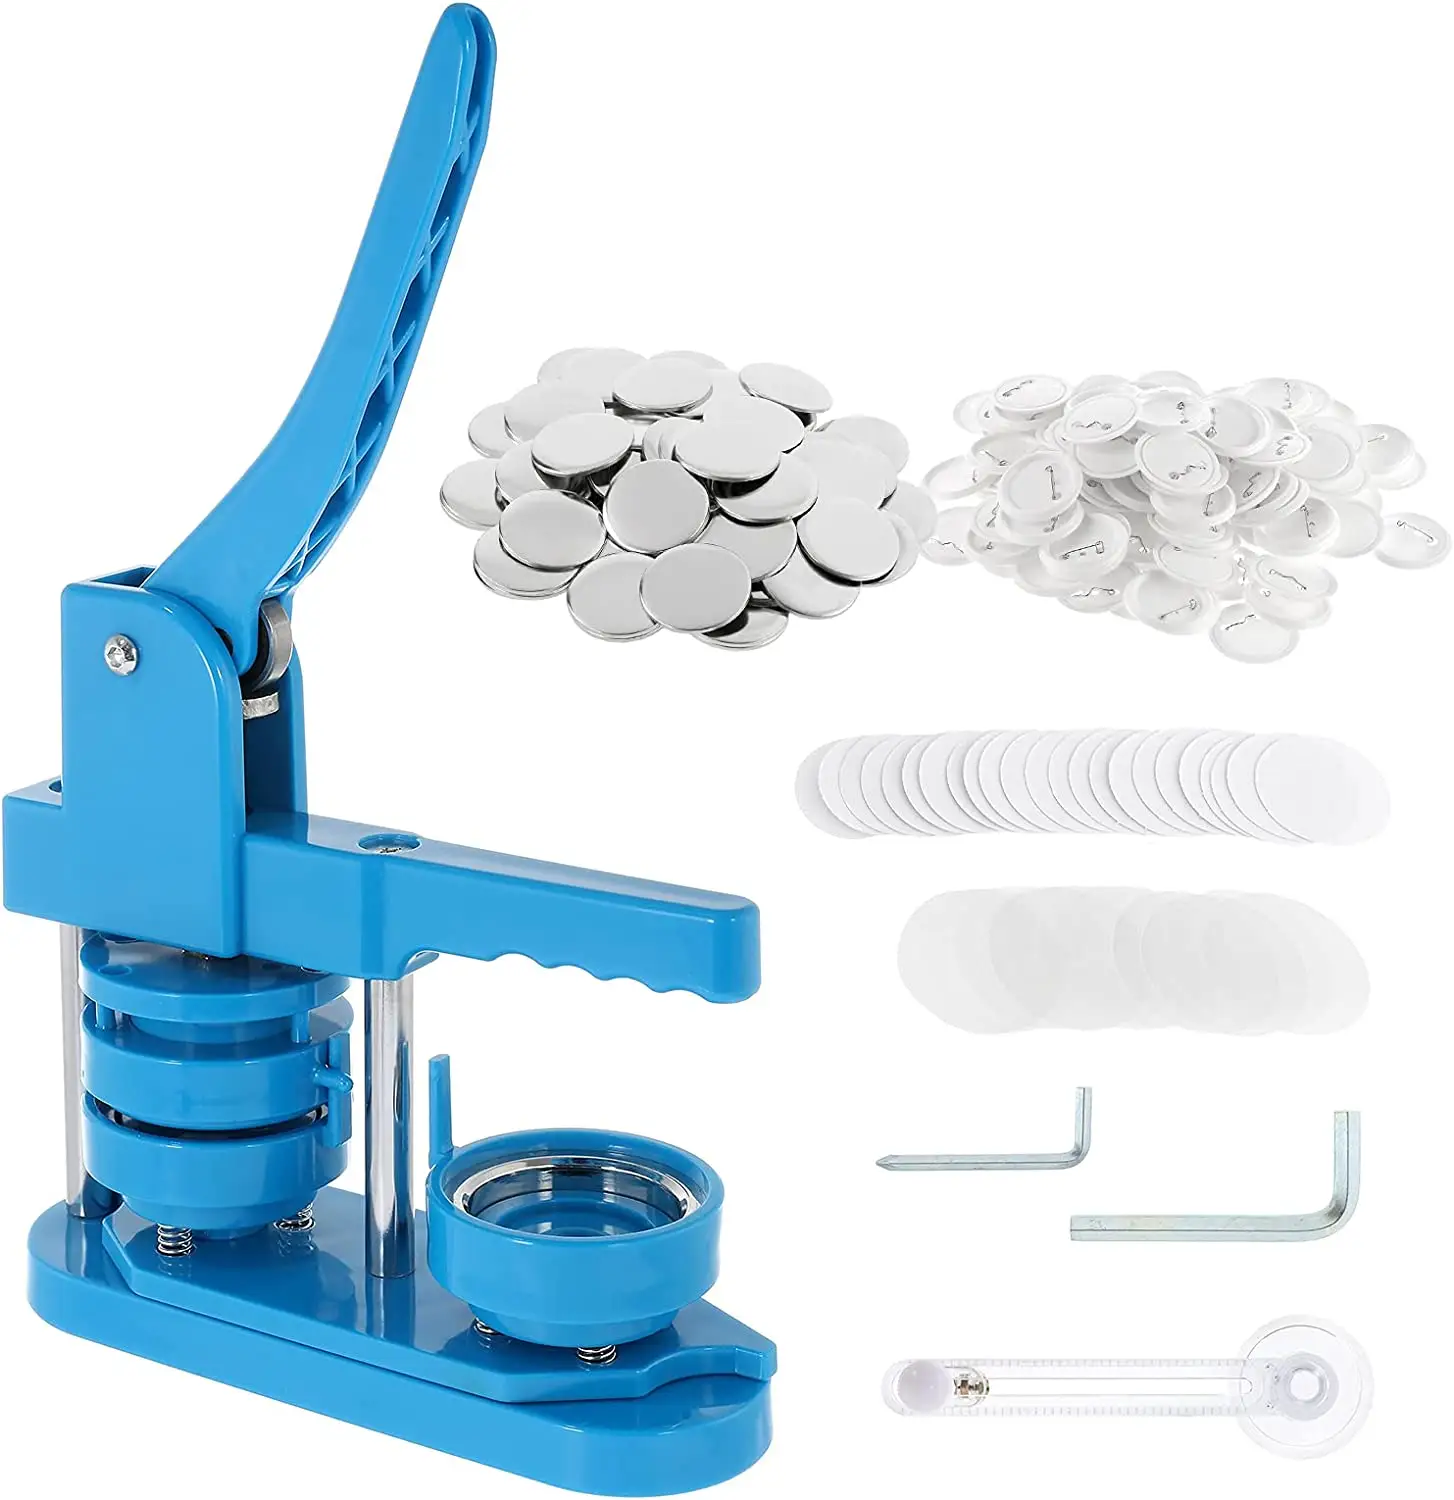 58mm 2.25Inch Button Maker Machine Badge Press Making Kit with 200 Sets of Blank Button Supplies, Circle Cutter